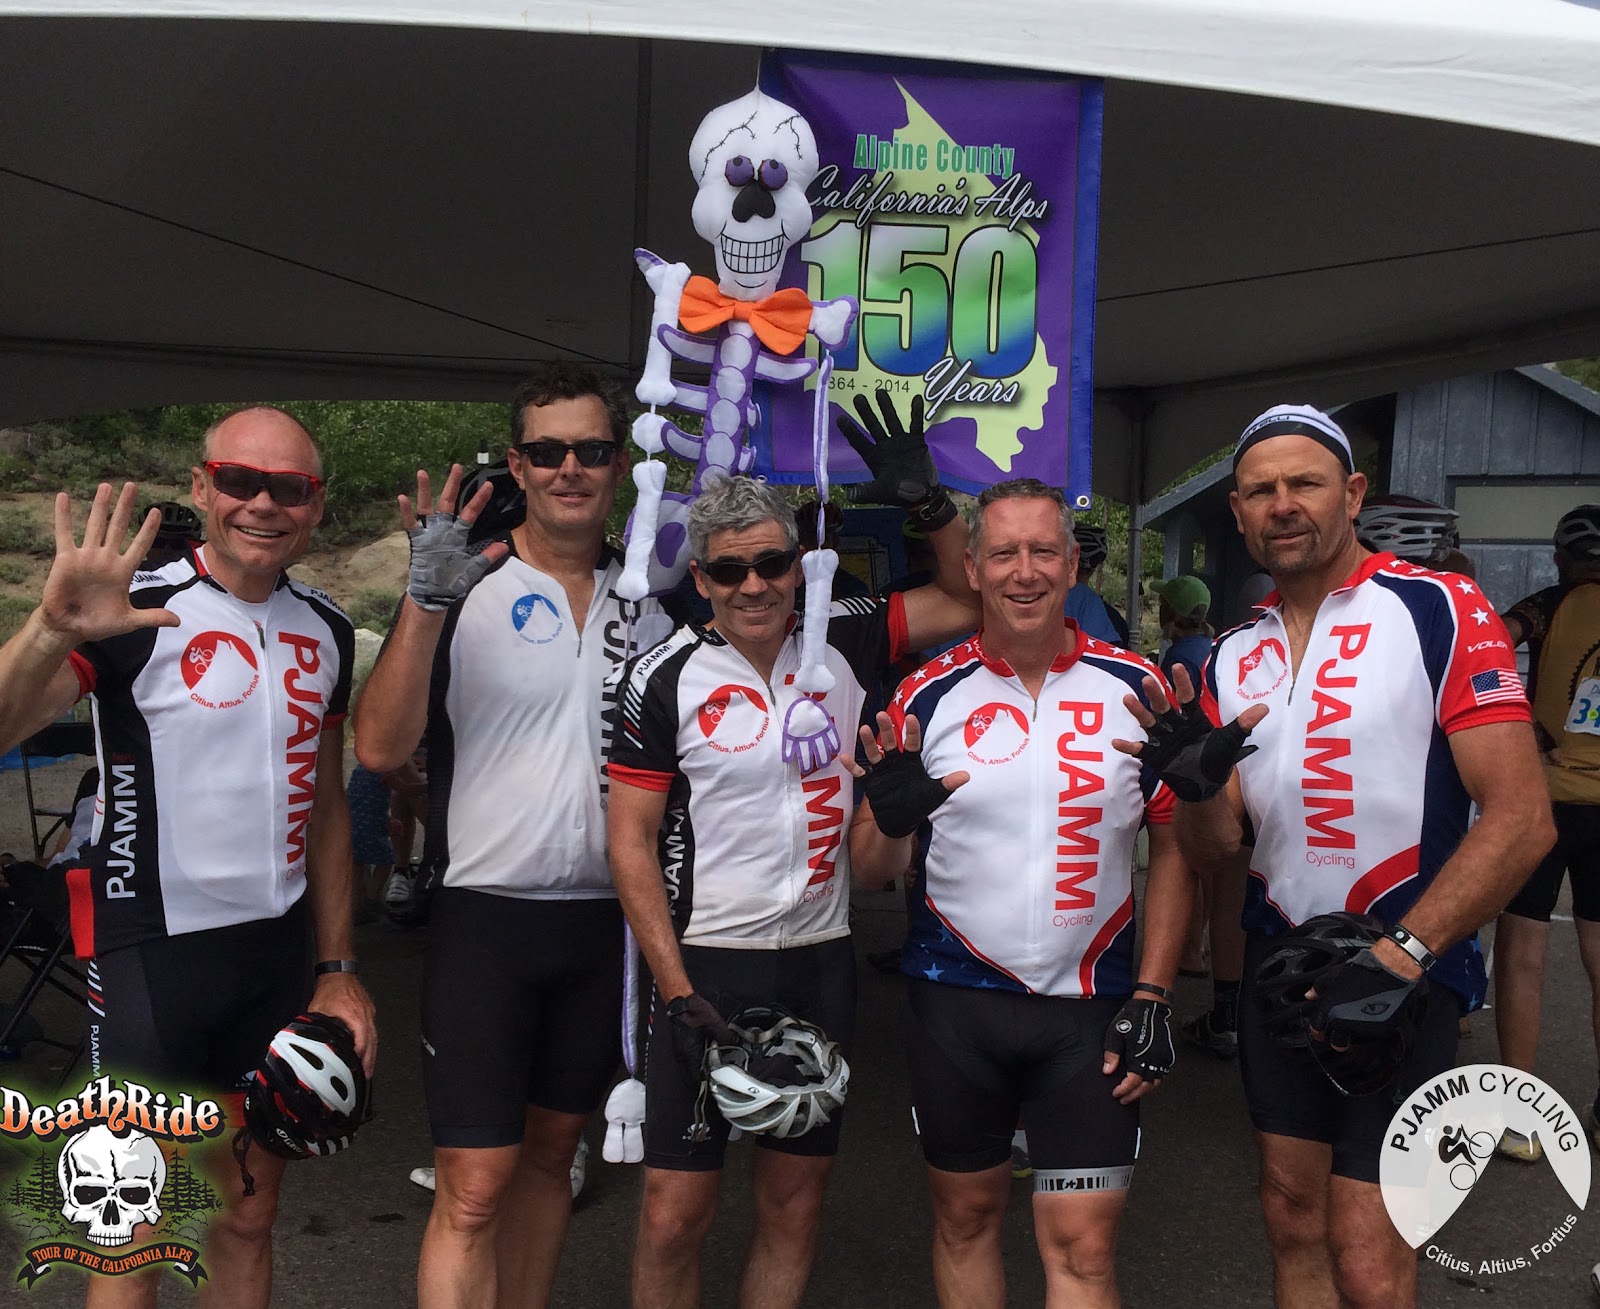 PJAMM Cyclists pose at the finish of 2015 Death ride